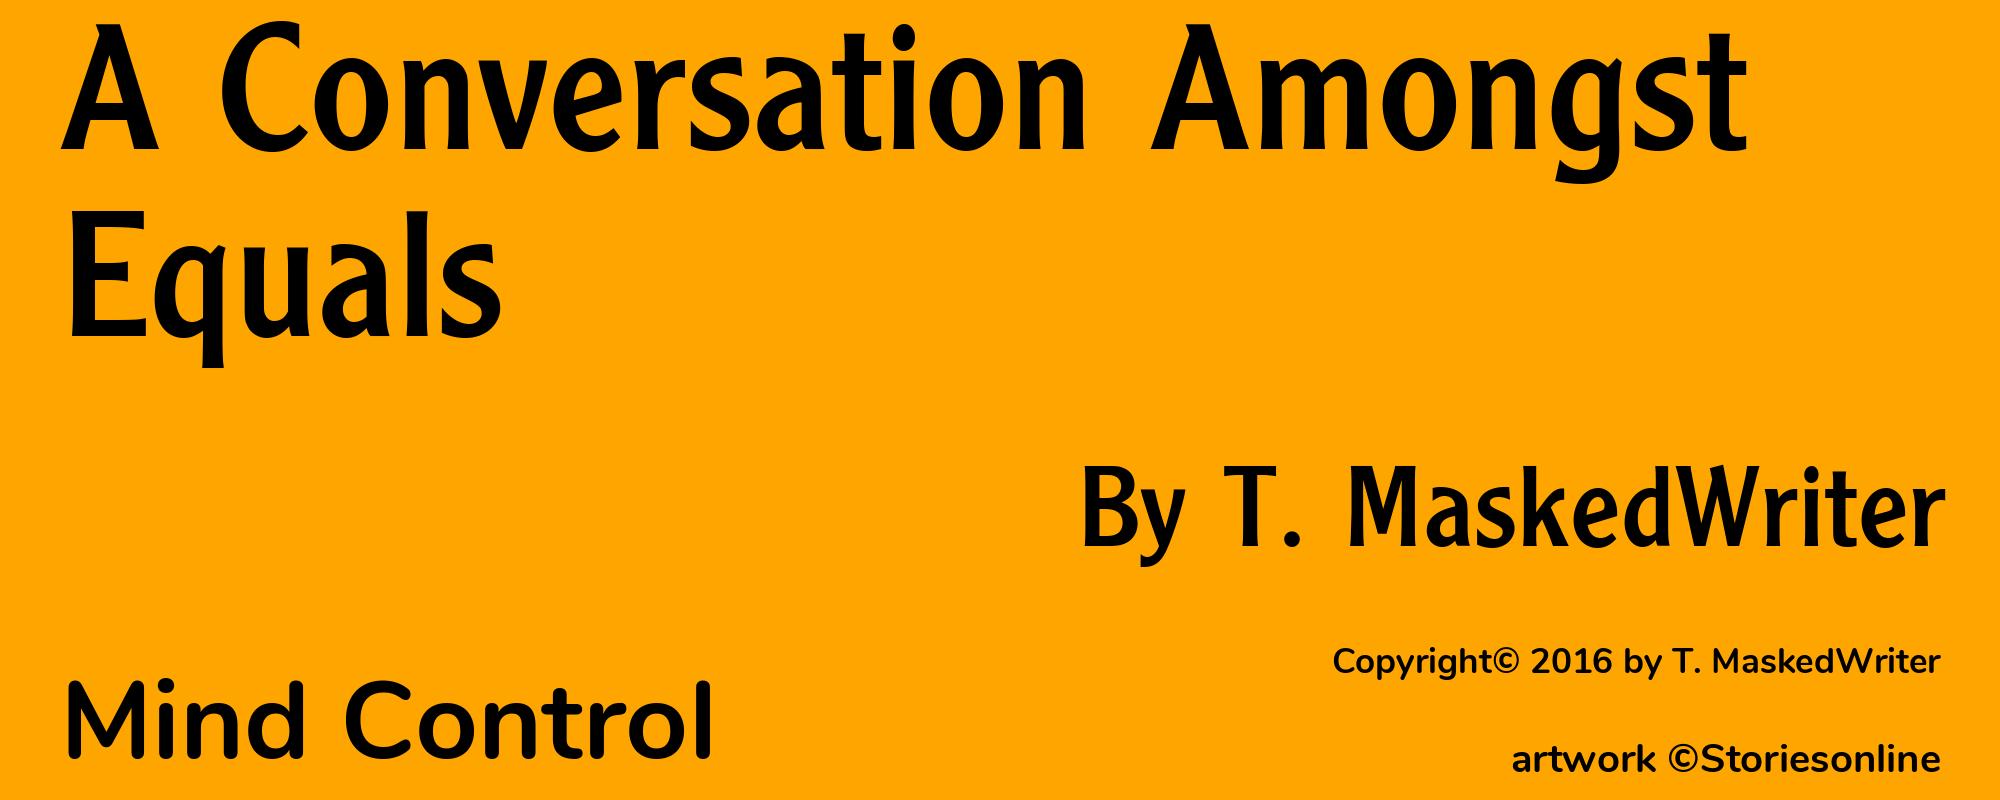 A Conversation Amongst Equals - Cover